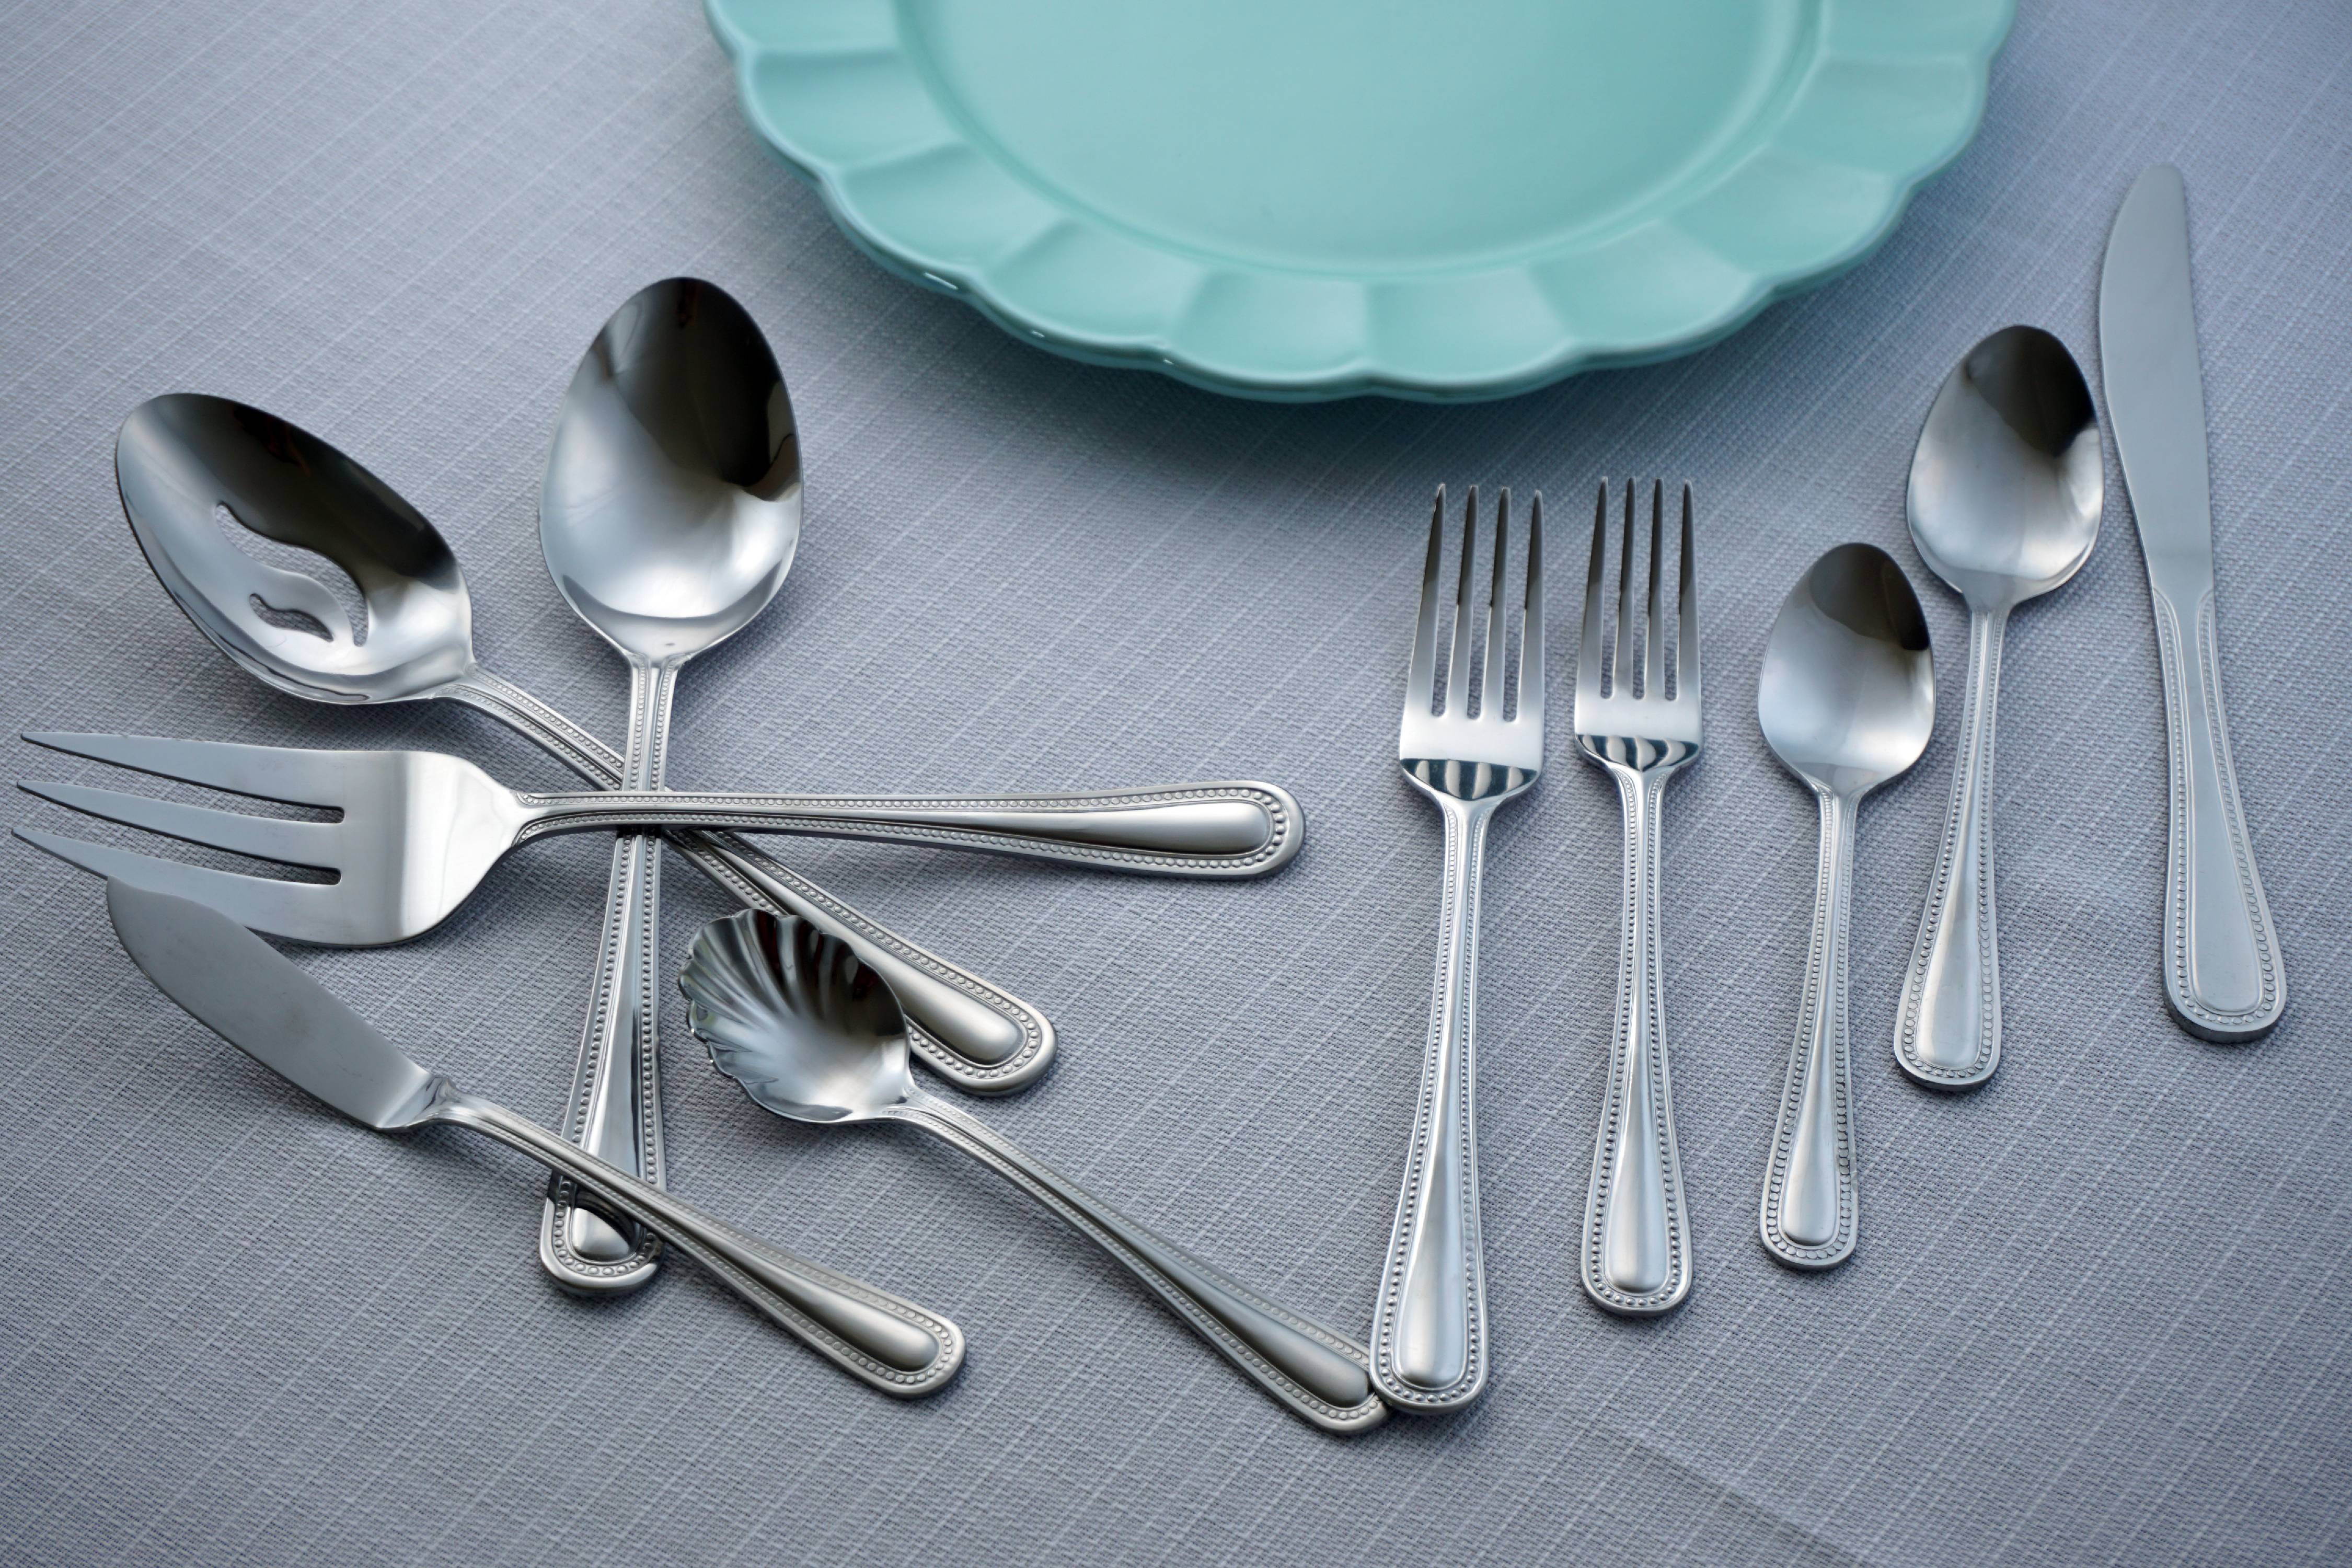 Mainstays Mallory 45 Piece Stainless Steel Flatware Set - image 1 of 6